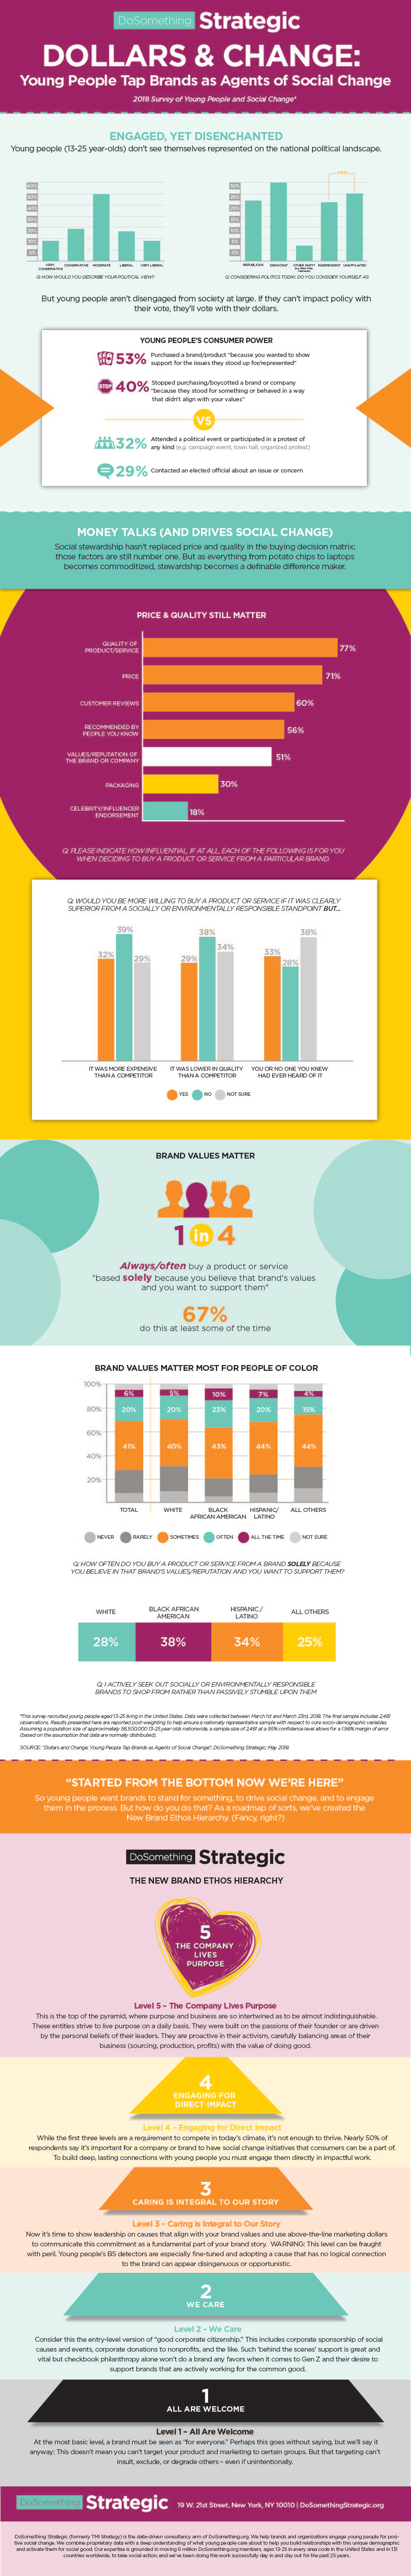 Brands and Social Change: What Young People Want [Infographic]